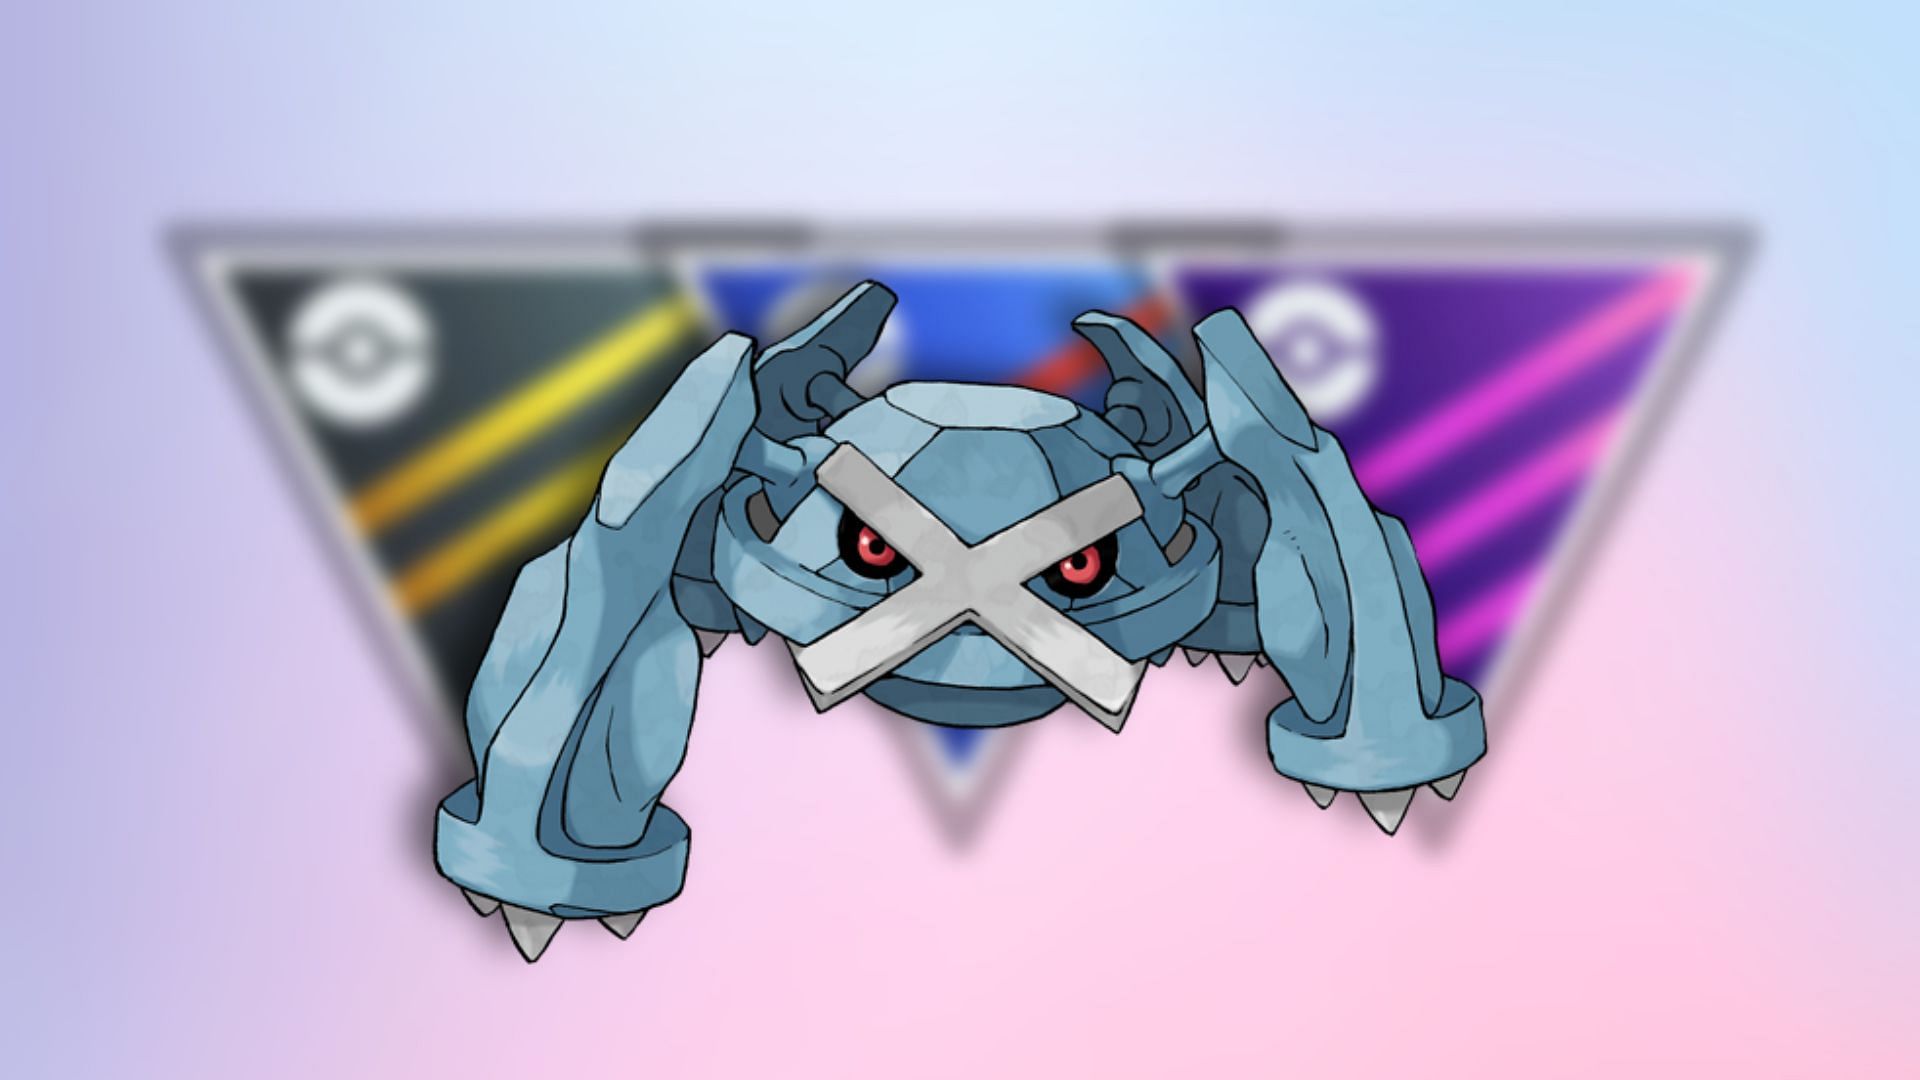 Metagross with Charged Attack Meteor Mash in Pokemon GO (Image via Sportskeeda)